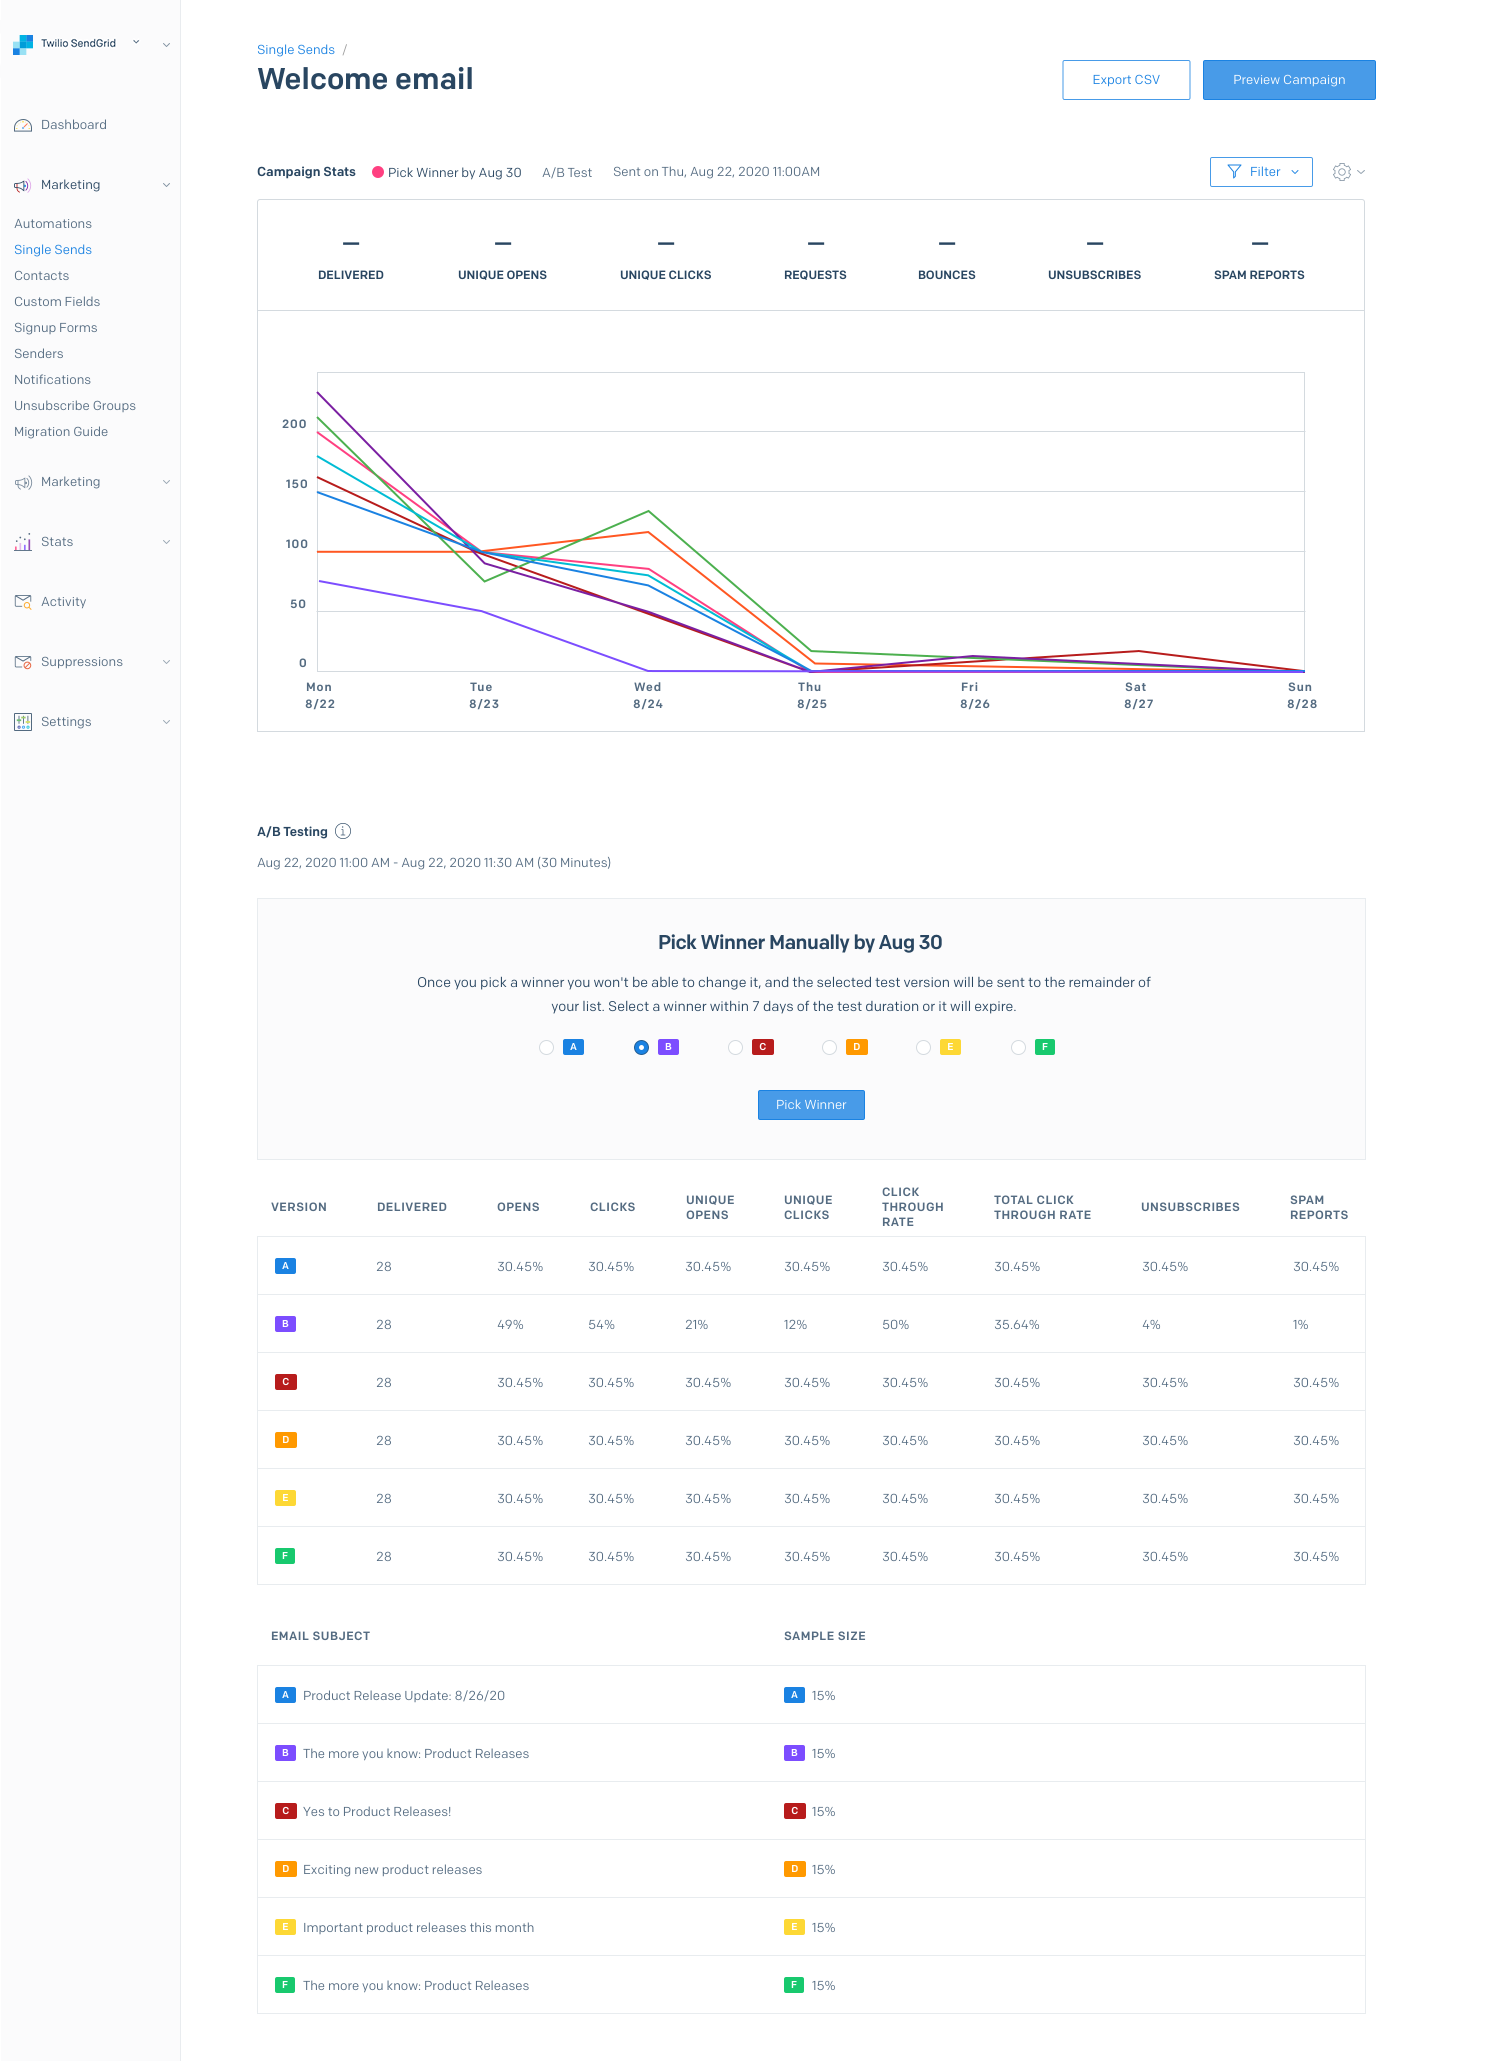 The stats or performance overview page for a Single Send A/B test.